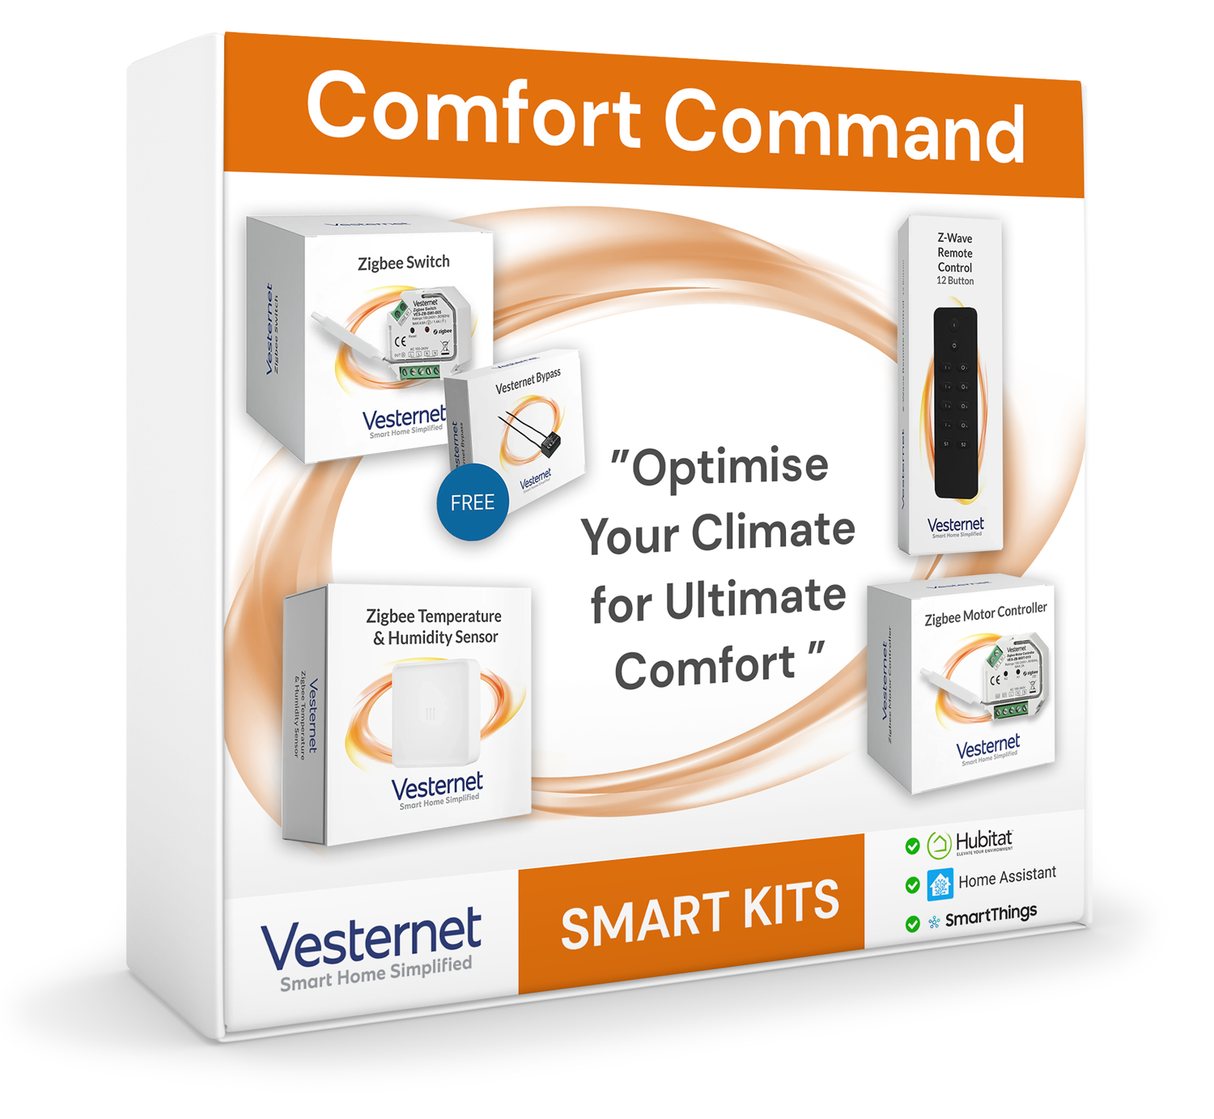 Comfort Command: Advanced Climate Kit for Optimal Home Comfort